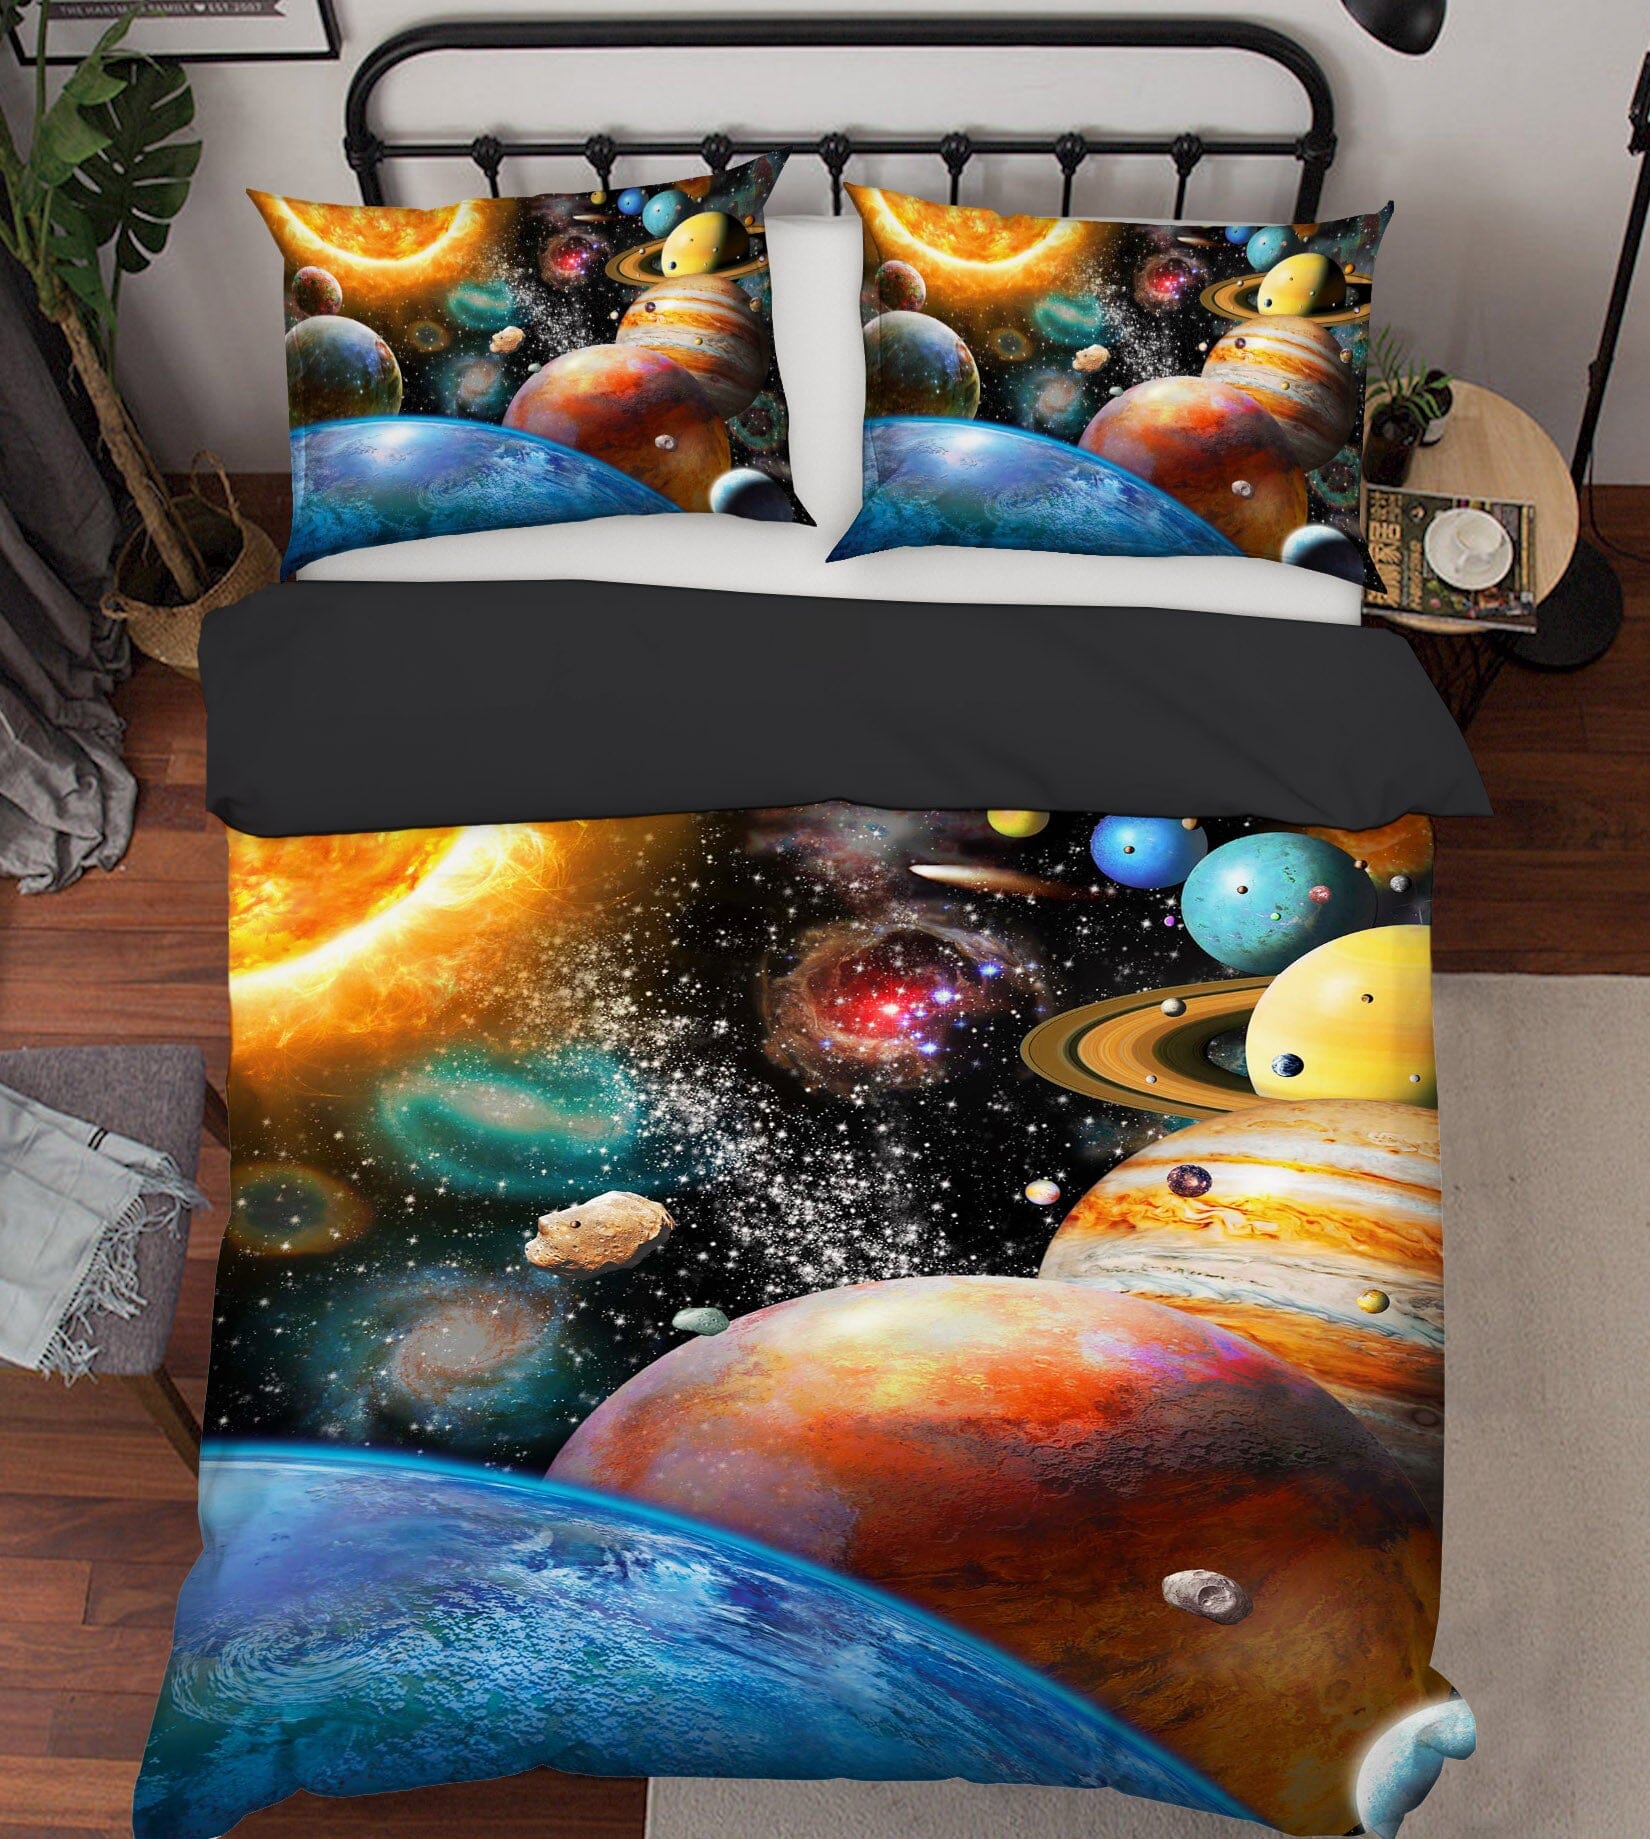 3D Color Planet 2106 Adrian Chesterman Bedding Bed Pillowcases Quilt Quiet Covers AJ Creativity Home 